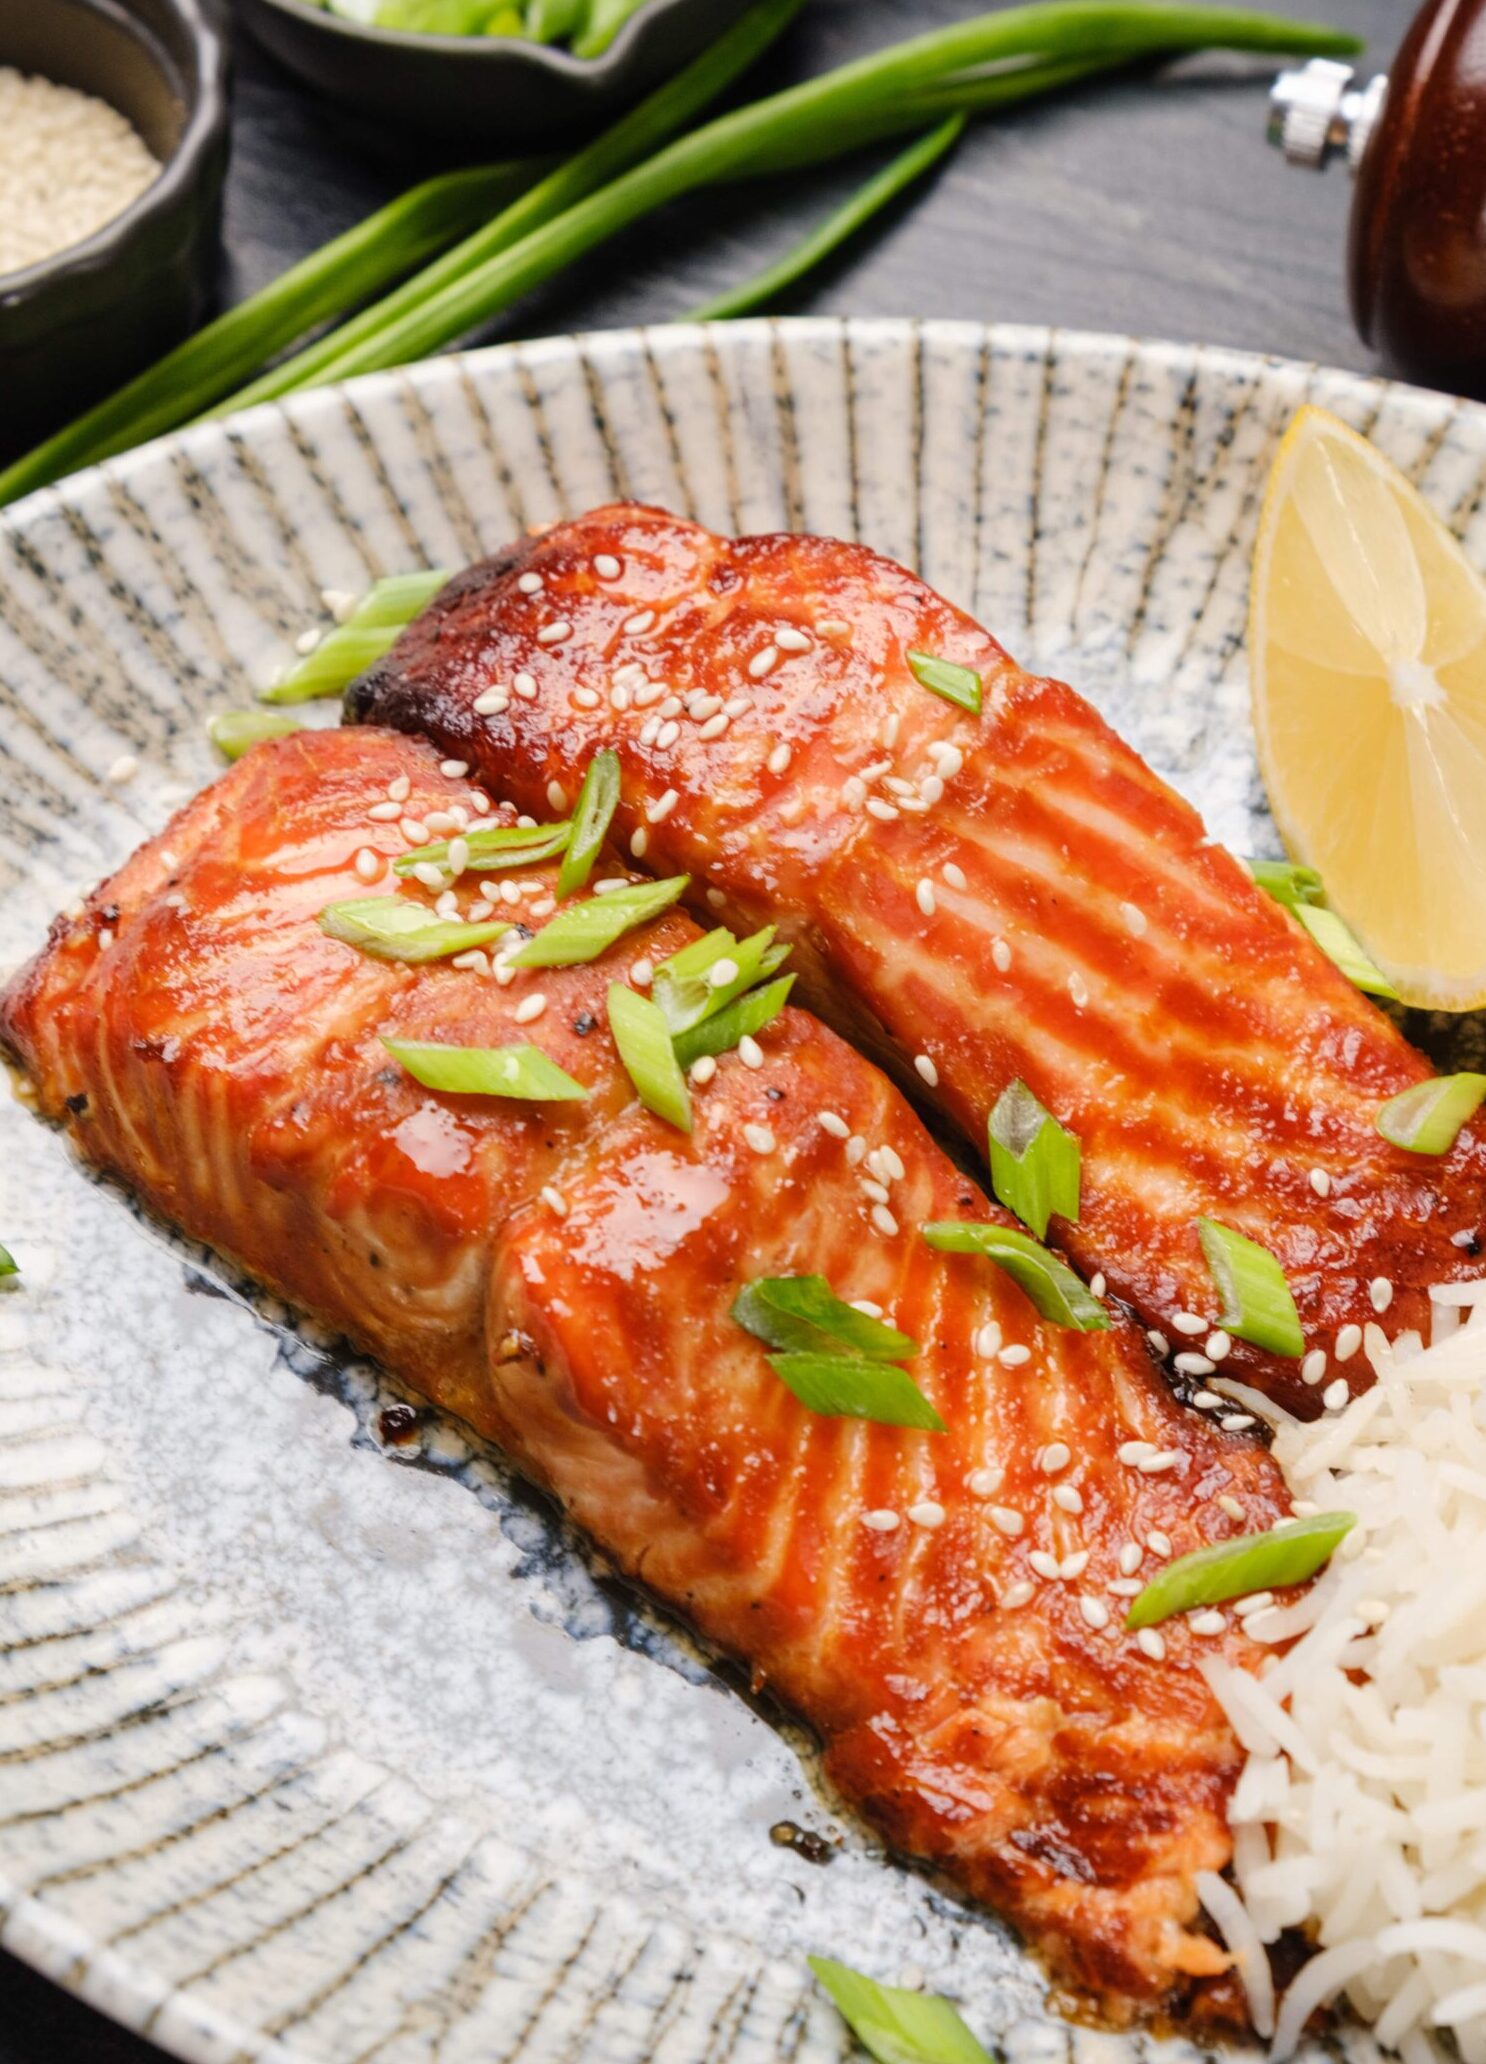 A plate with miso glazed salmon and rice on it with a lemon wedge on the side.